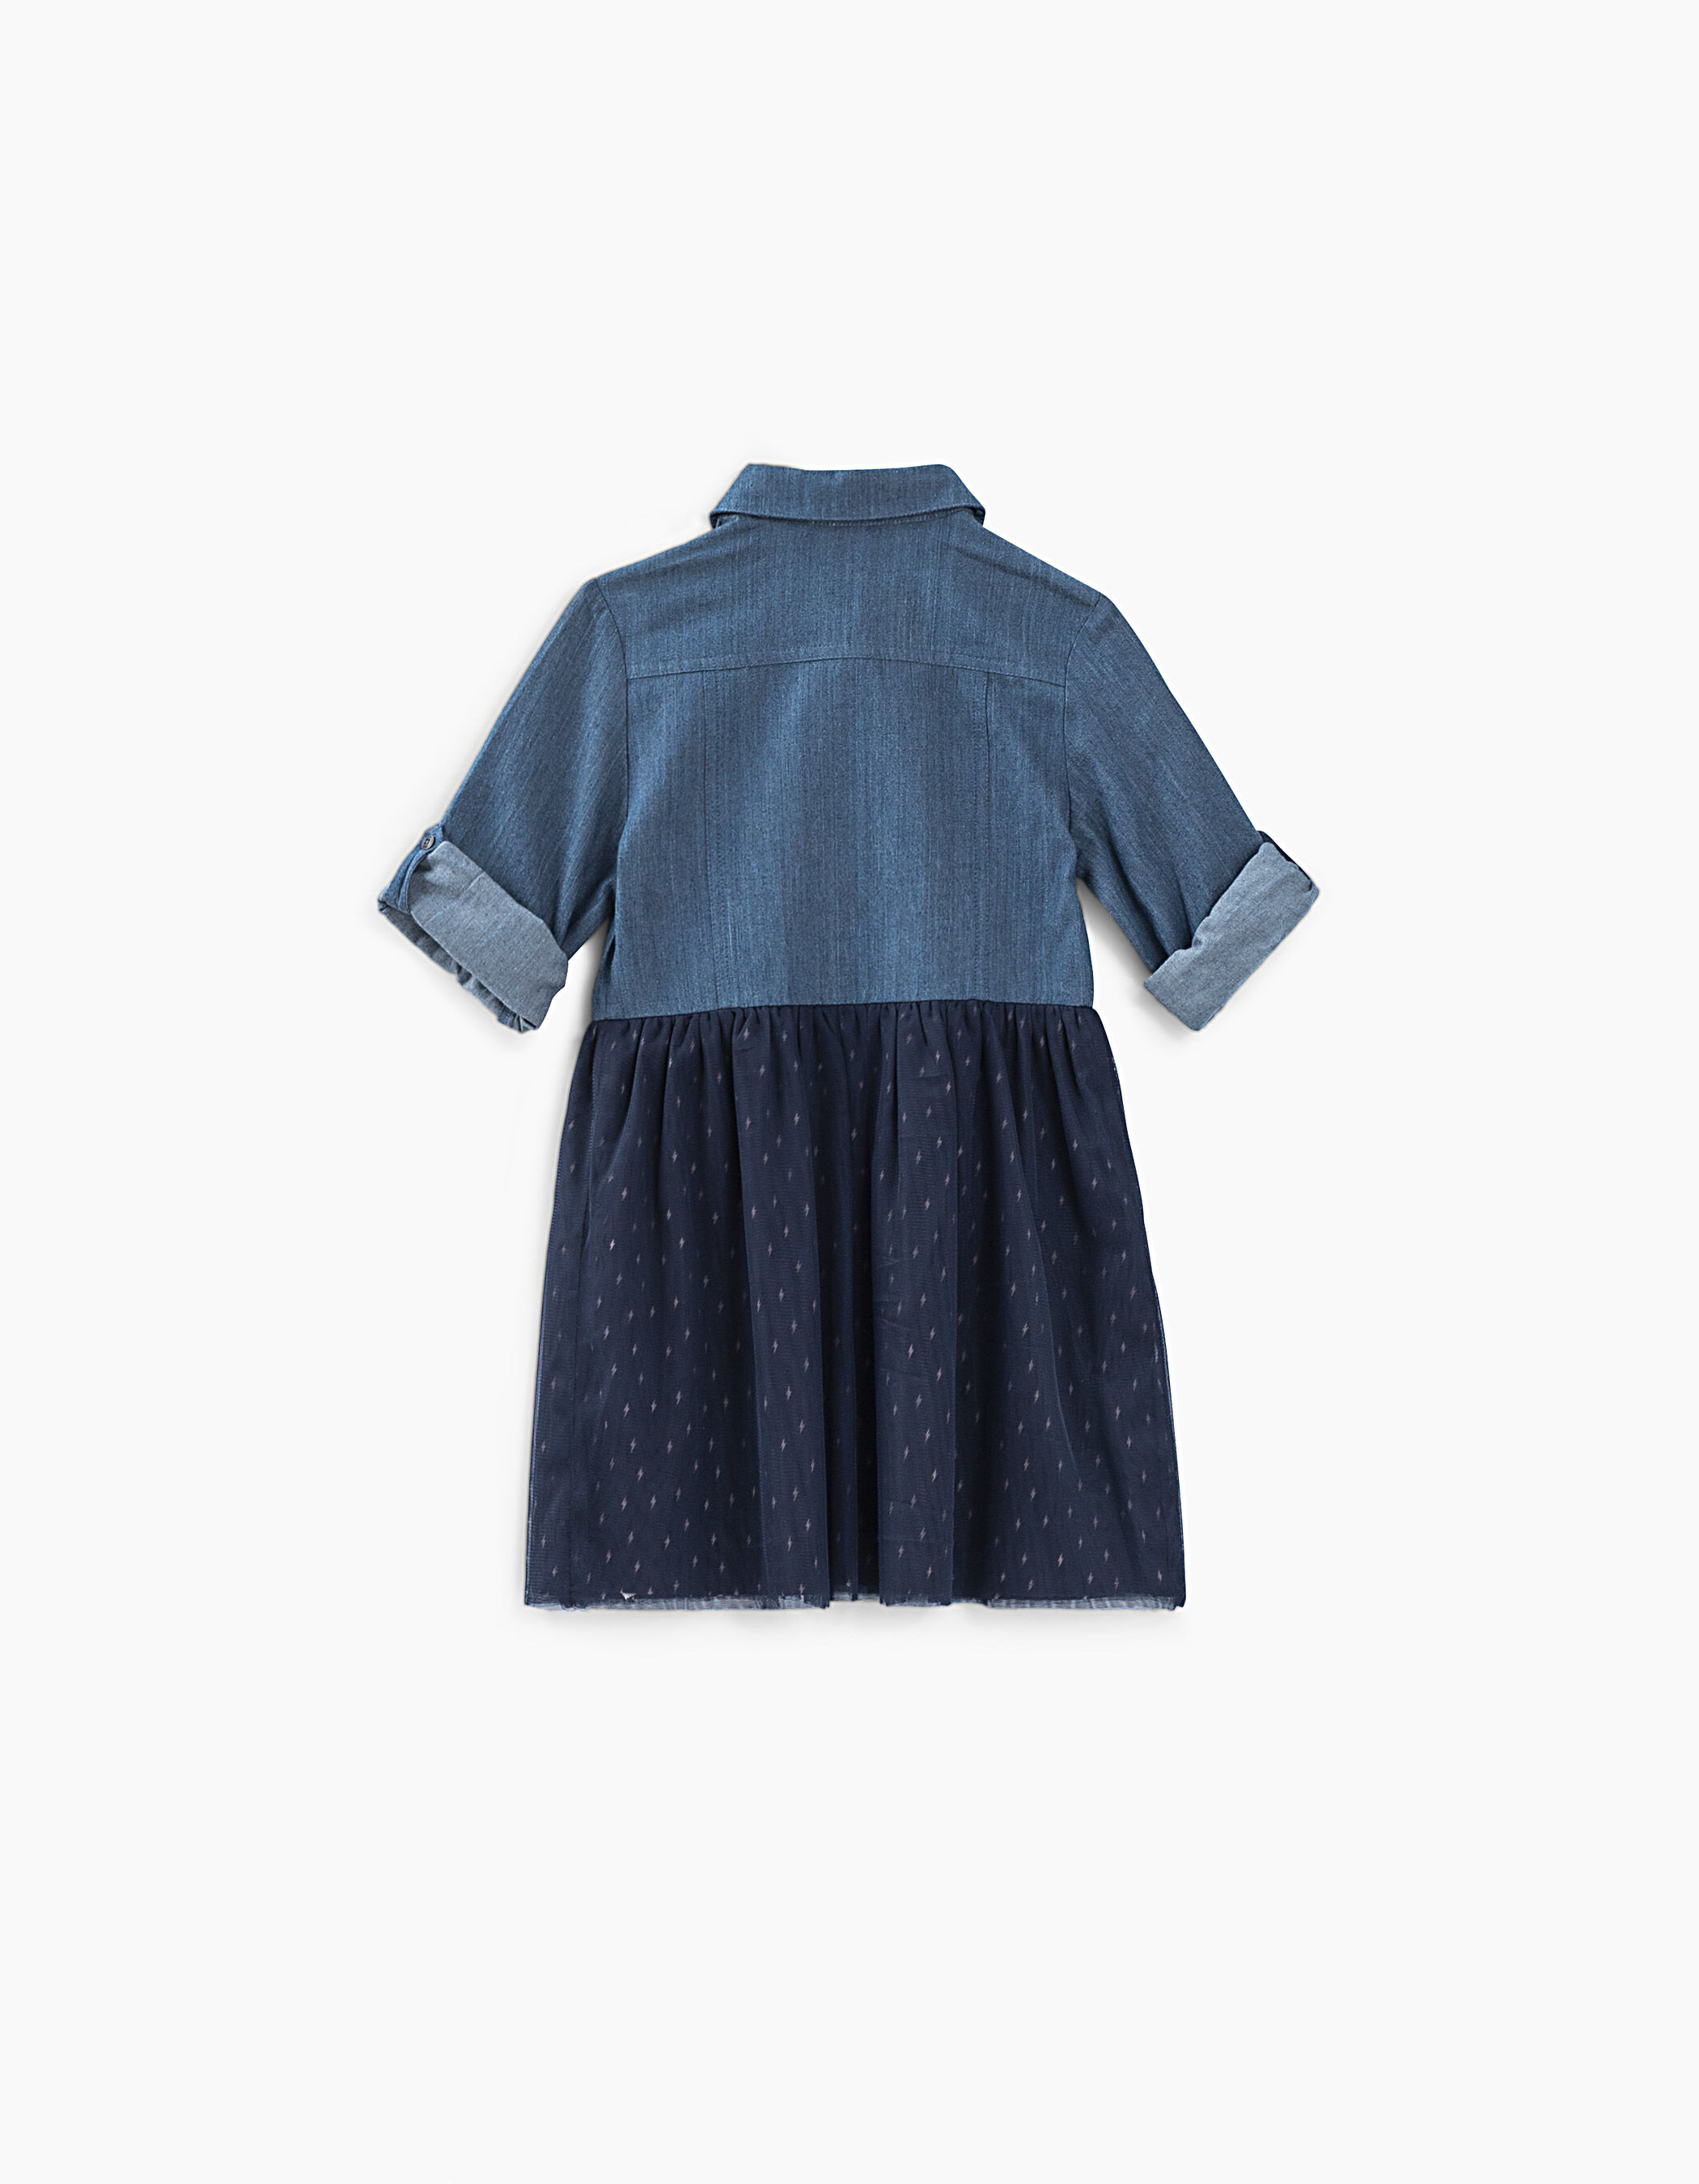 Denim Tulle Lace Dress | Cowgirl dresses, Denim and lace, Kids dress